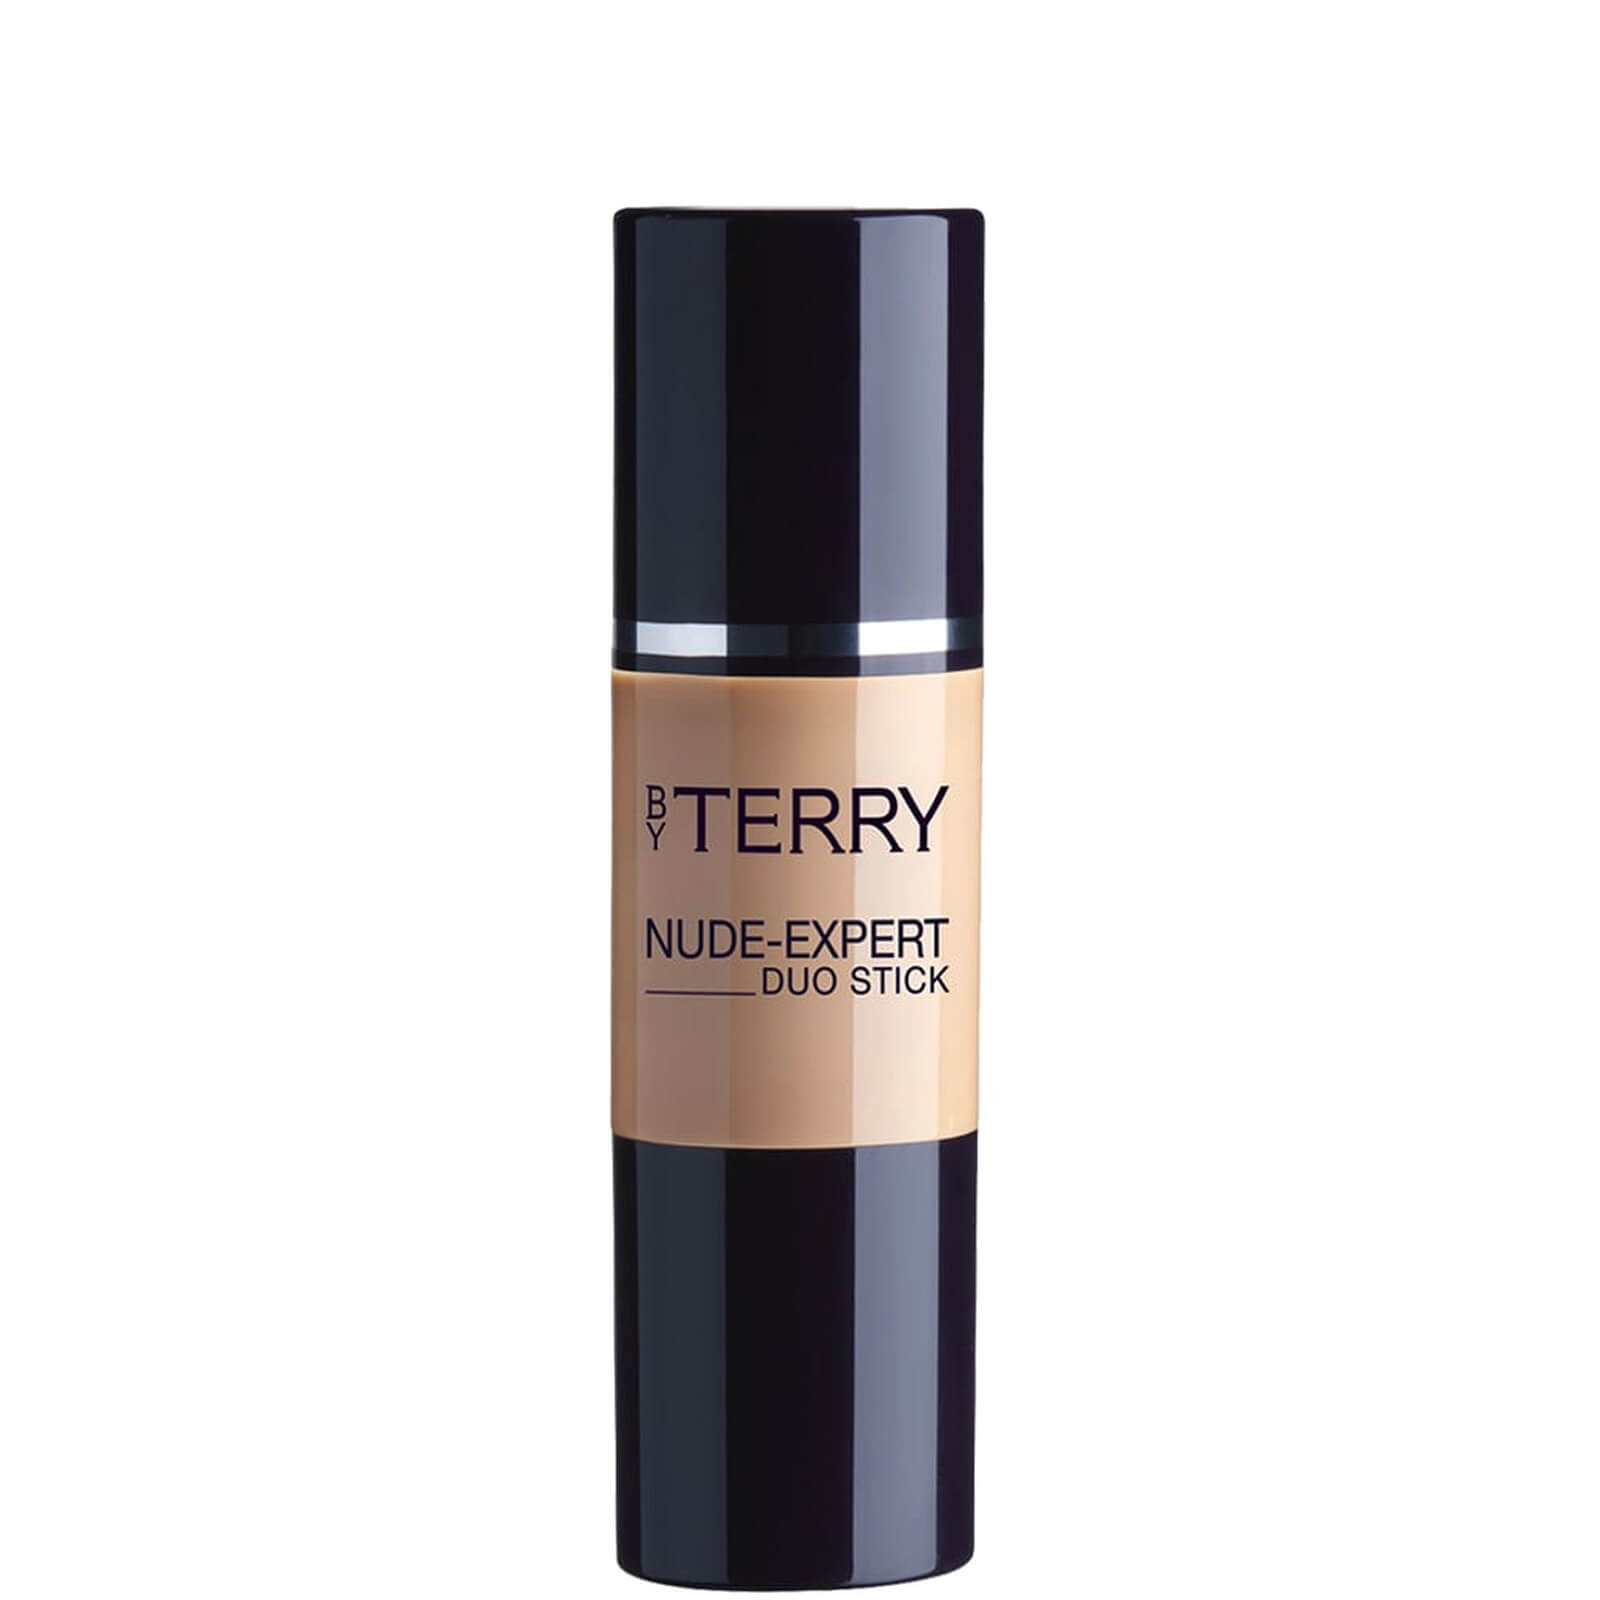 by terry nude-expert foundation (various shades) - 9.  honey beige